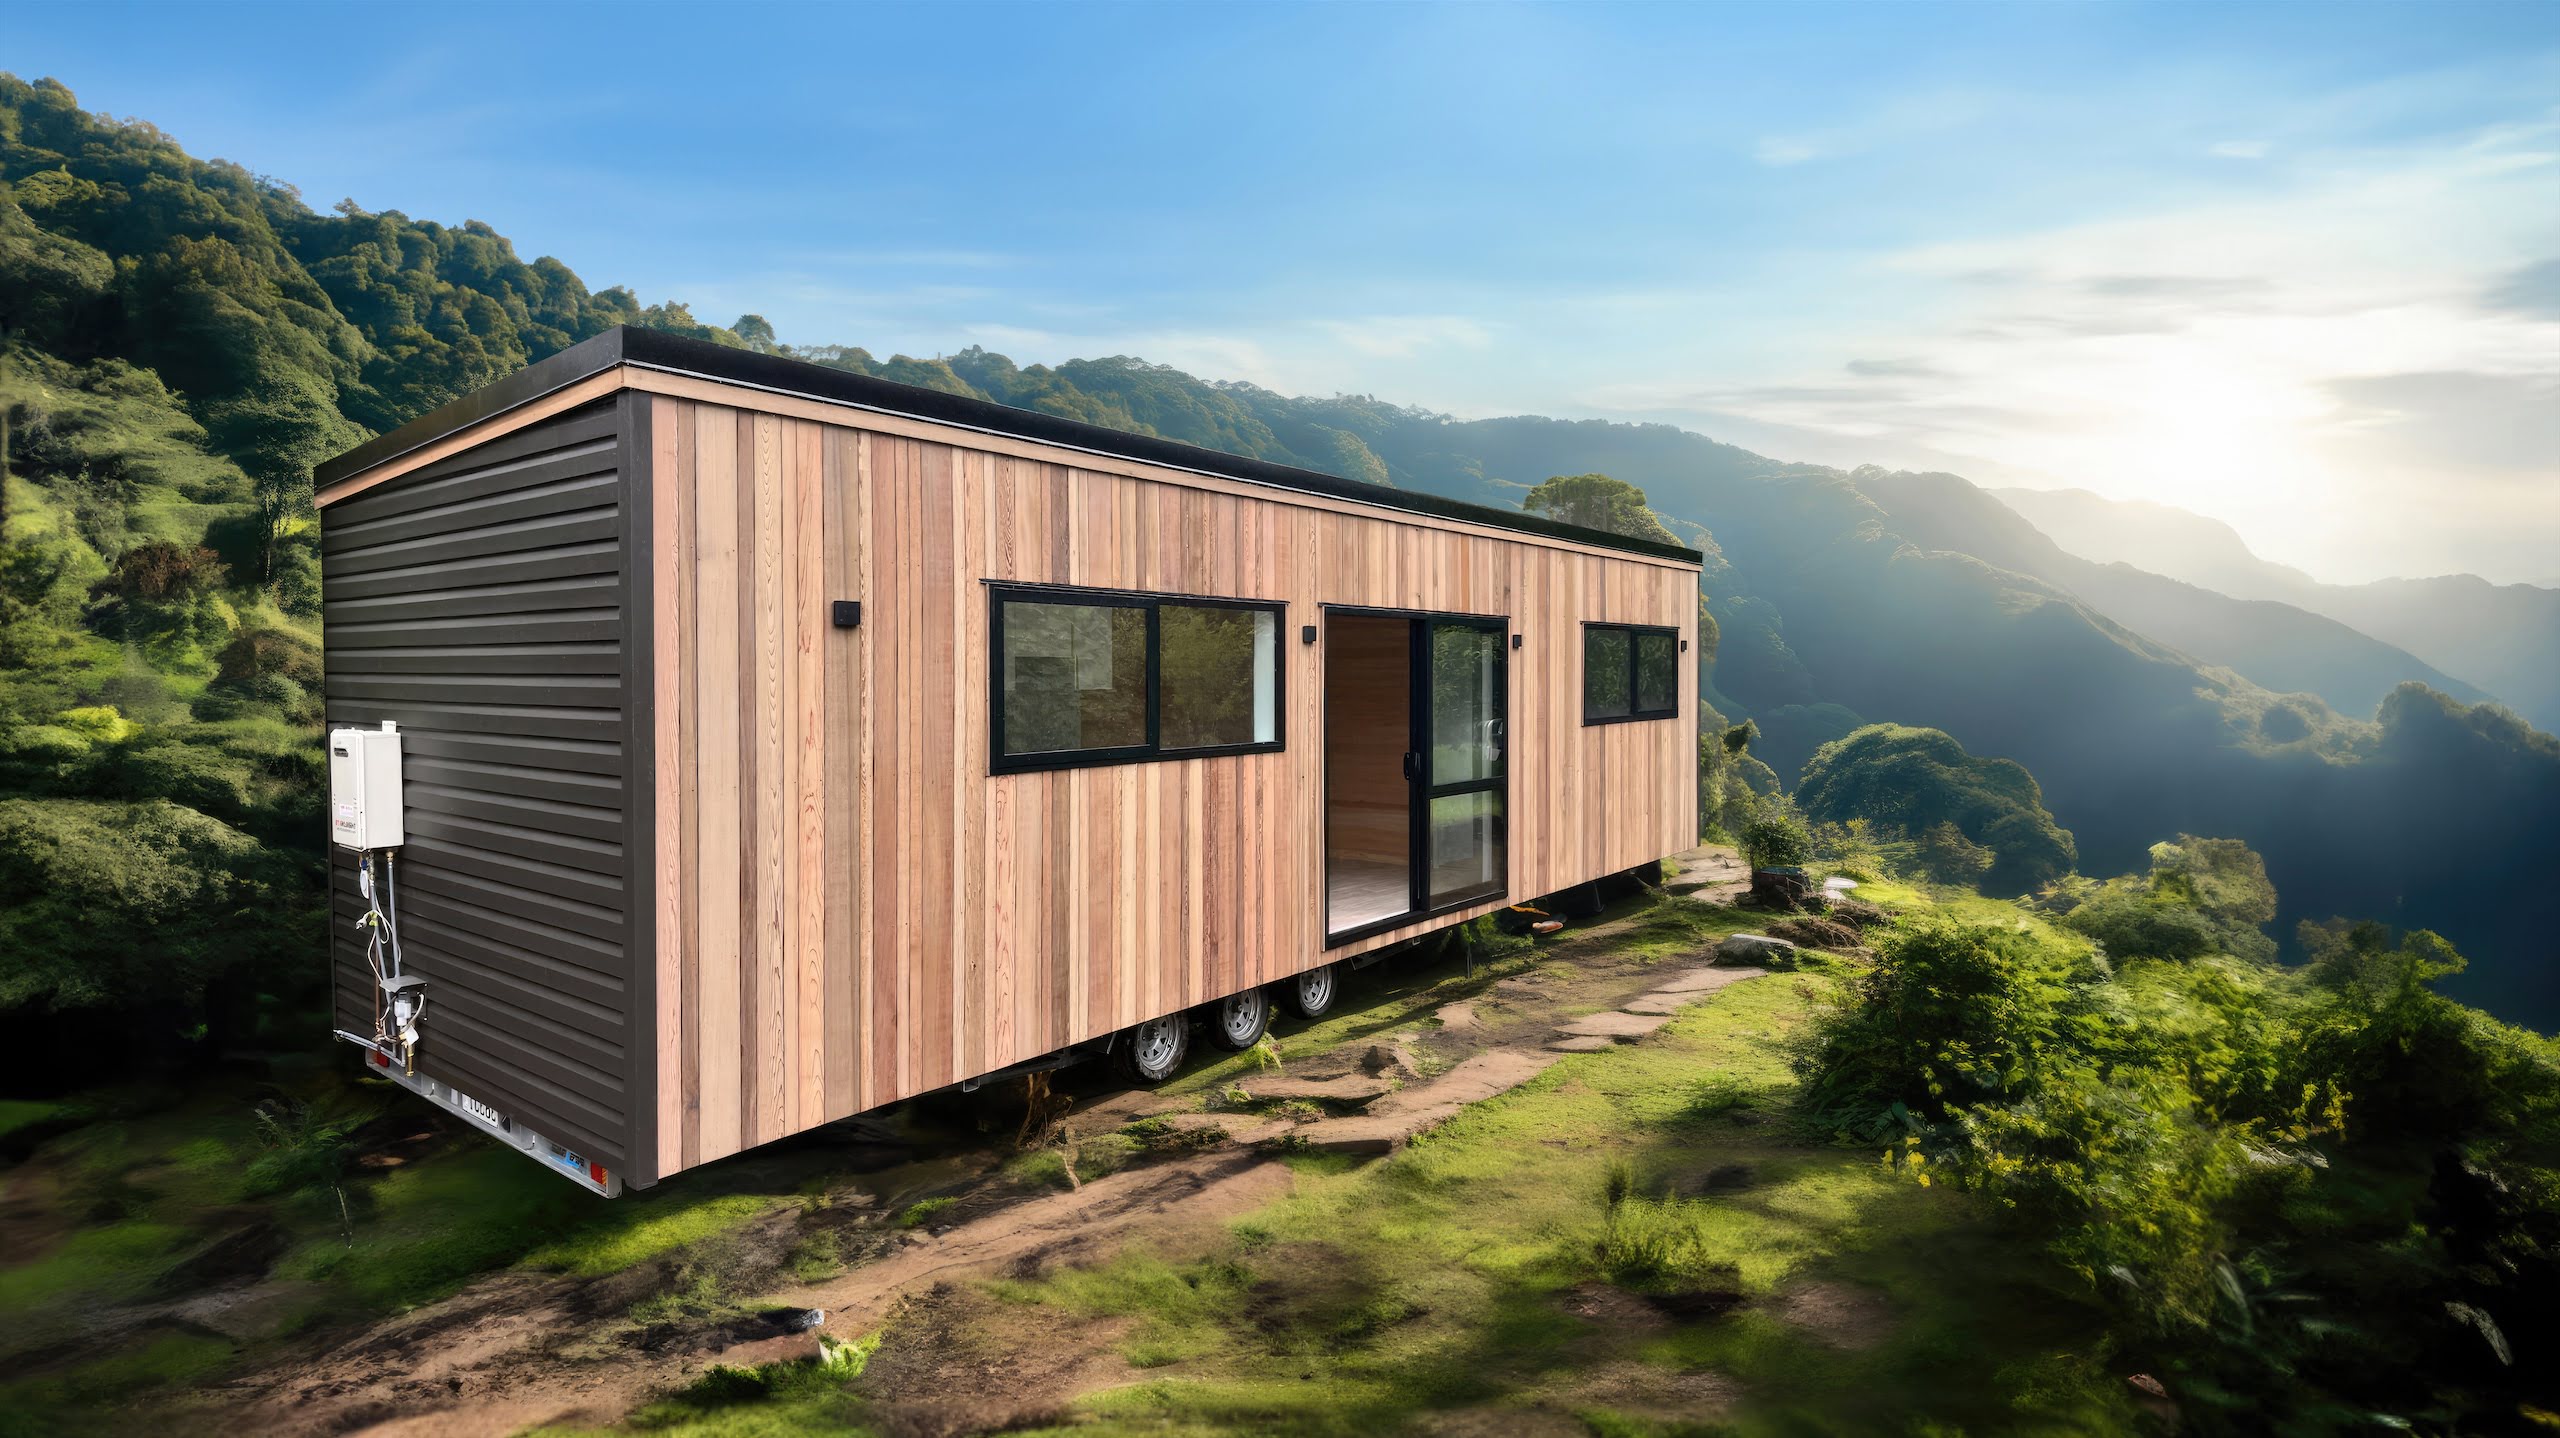 ‘Oasis’ by Absolute Tiny Houses, is a transportable home, available in an off-grid solar option.